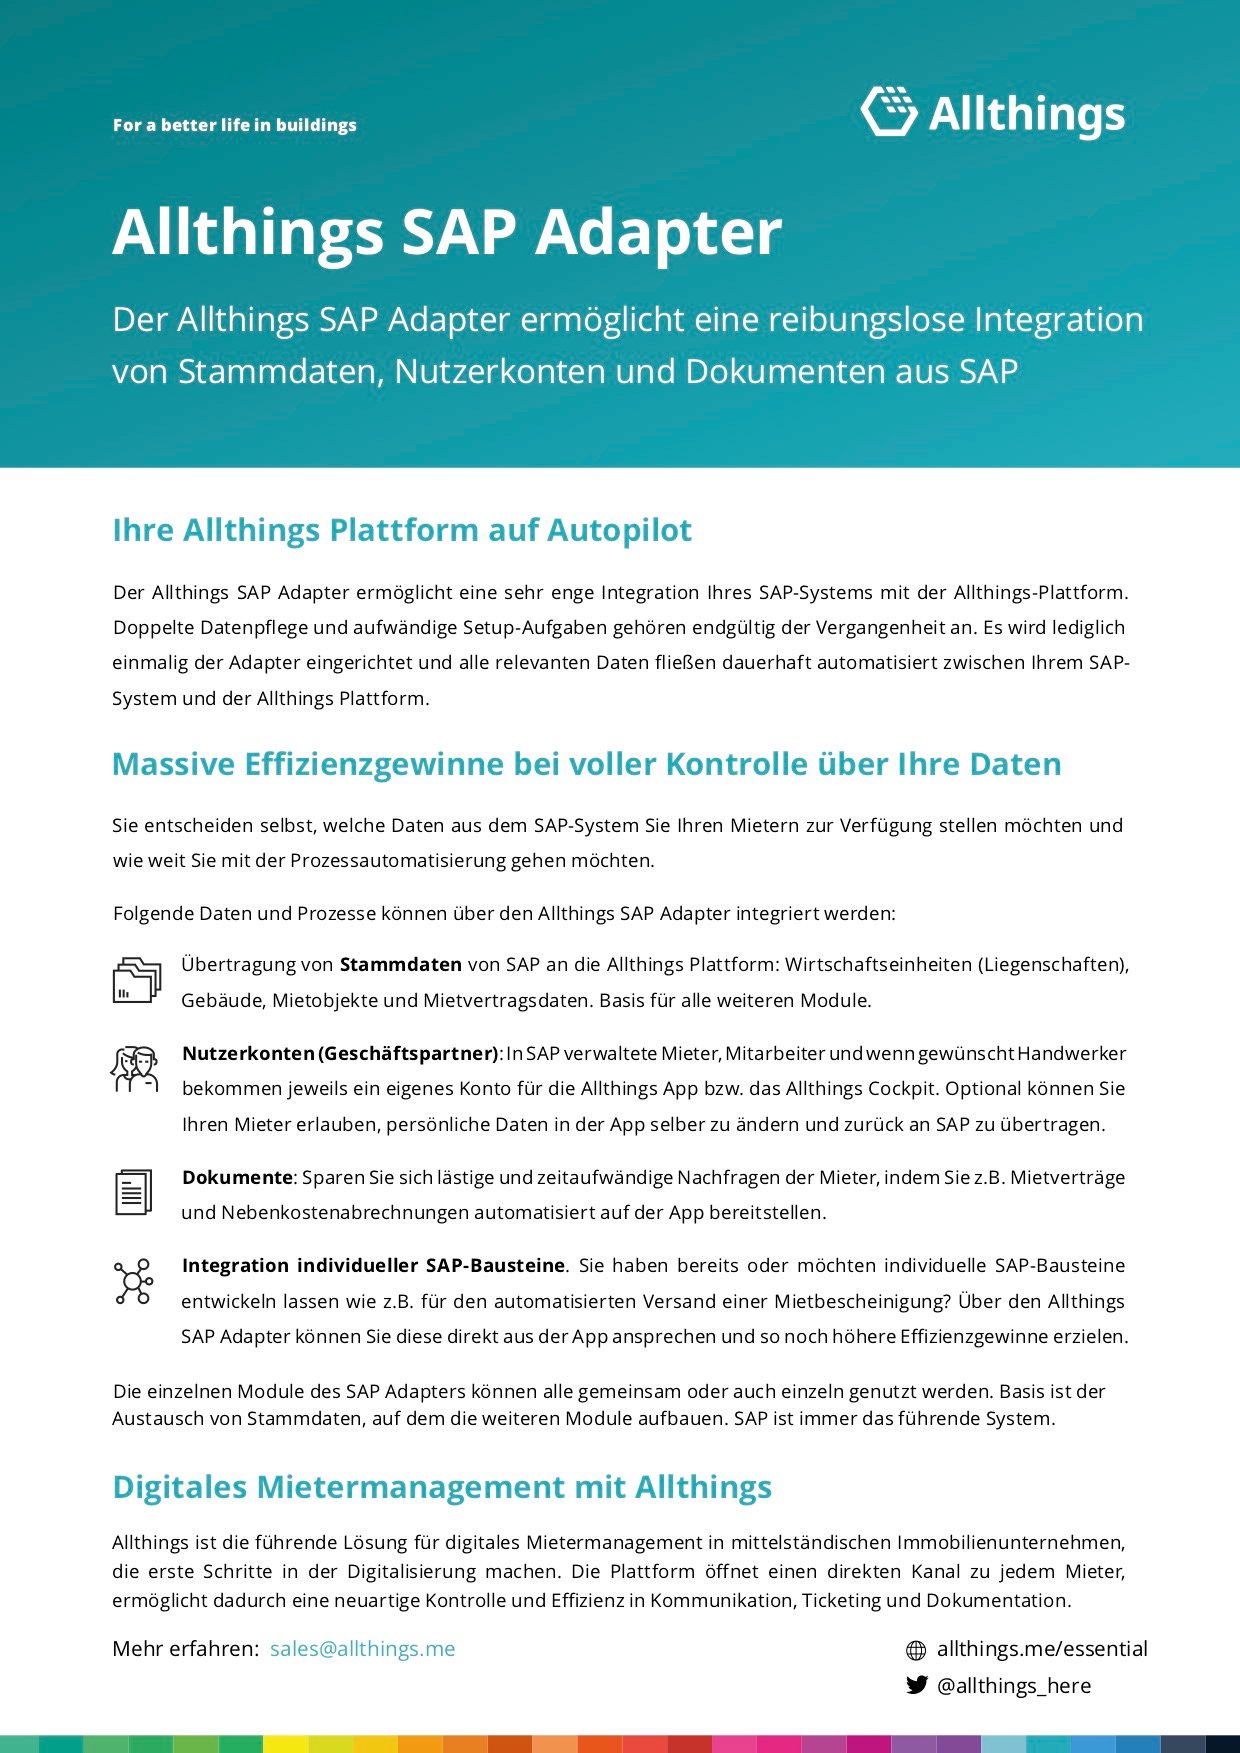 SAP one pager